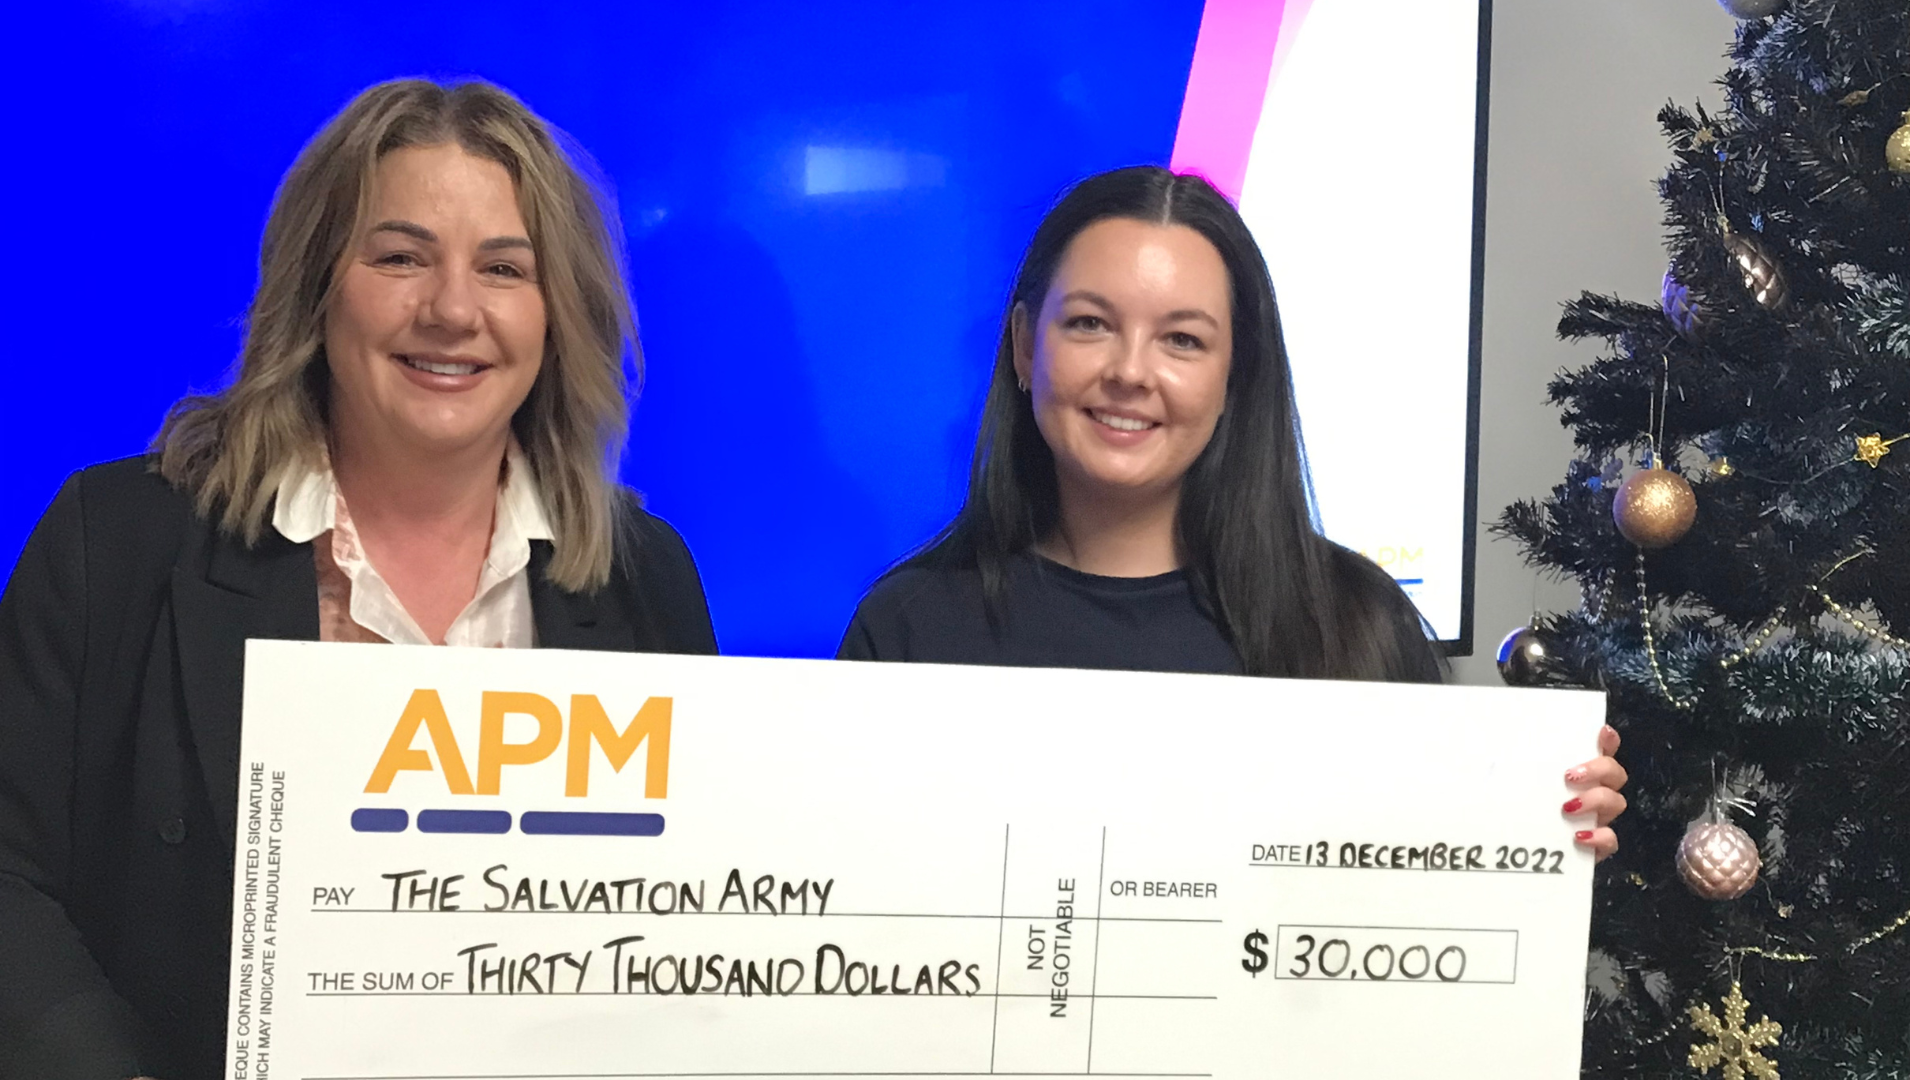 APM CEO of Employment Services Karen Rainbow and Grace Lacy from the Salvation Army